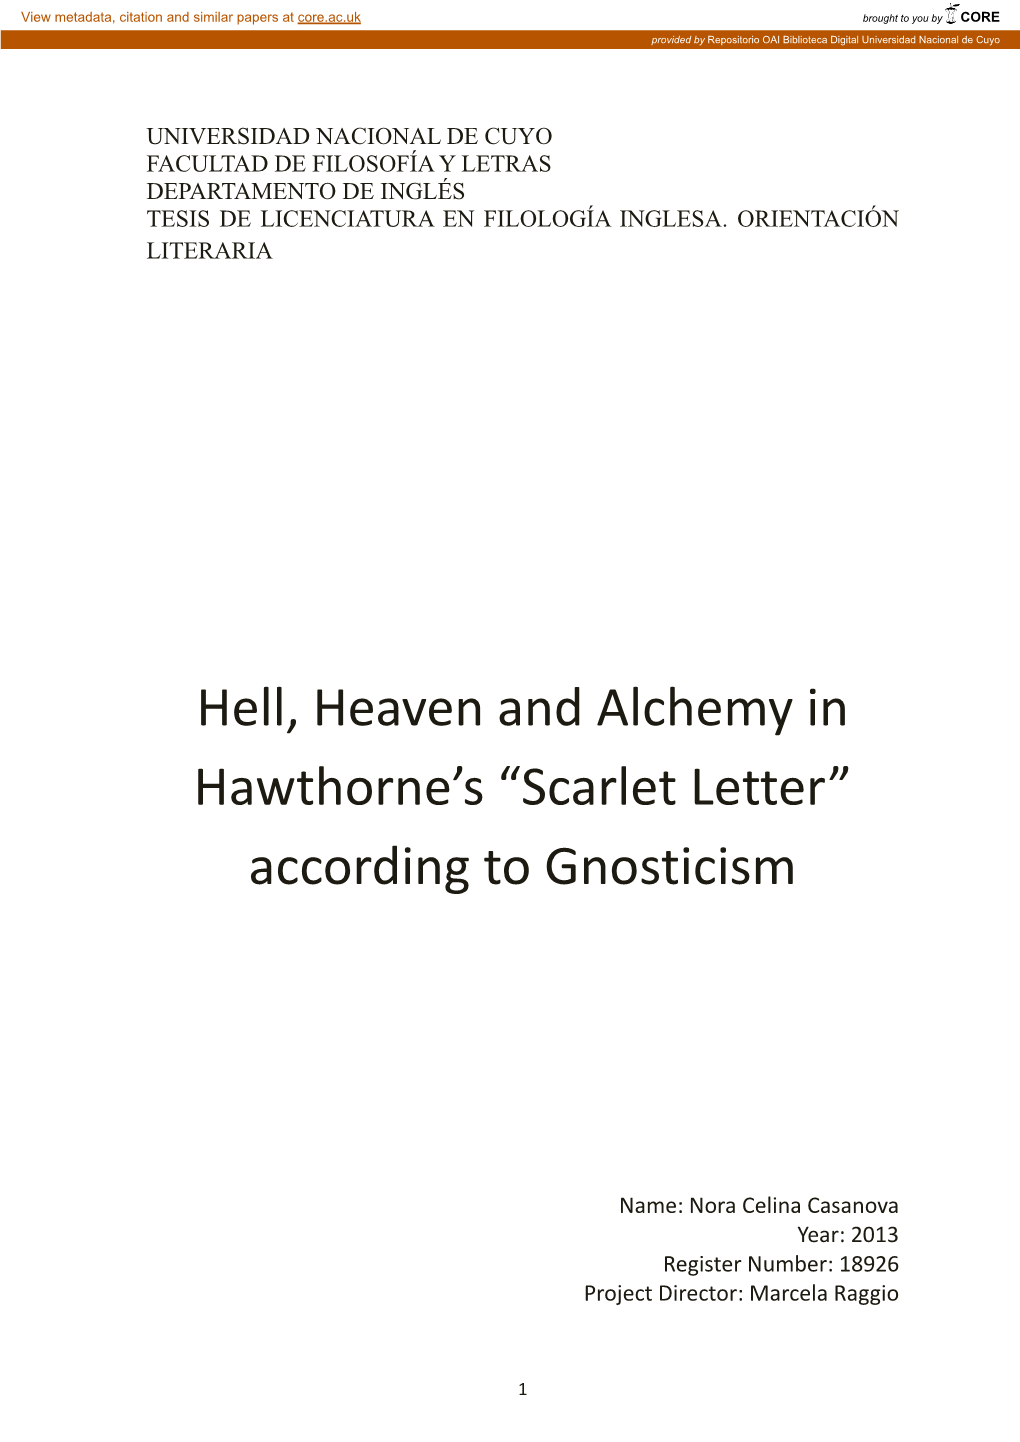 Hell, Heaven and Alchemy in Hawthorne's “Scarlet Letter” According to Gnosticism